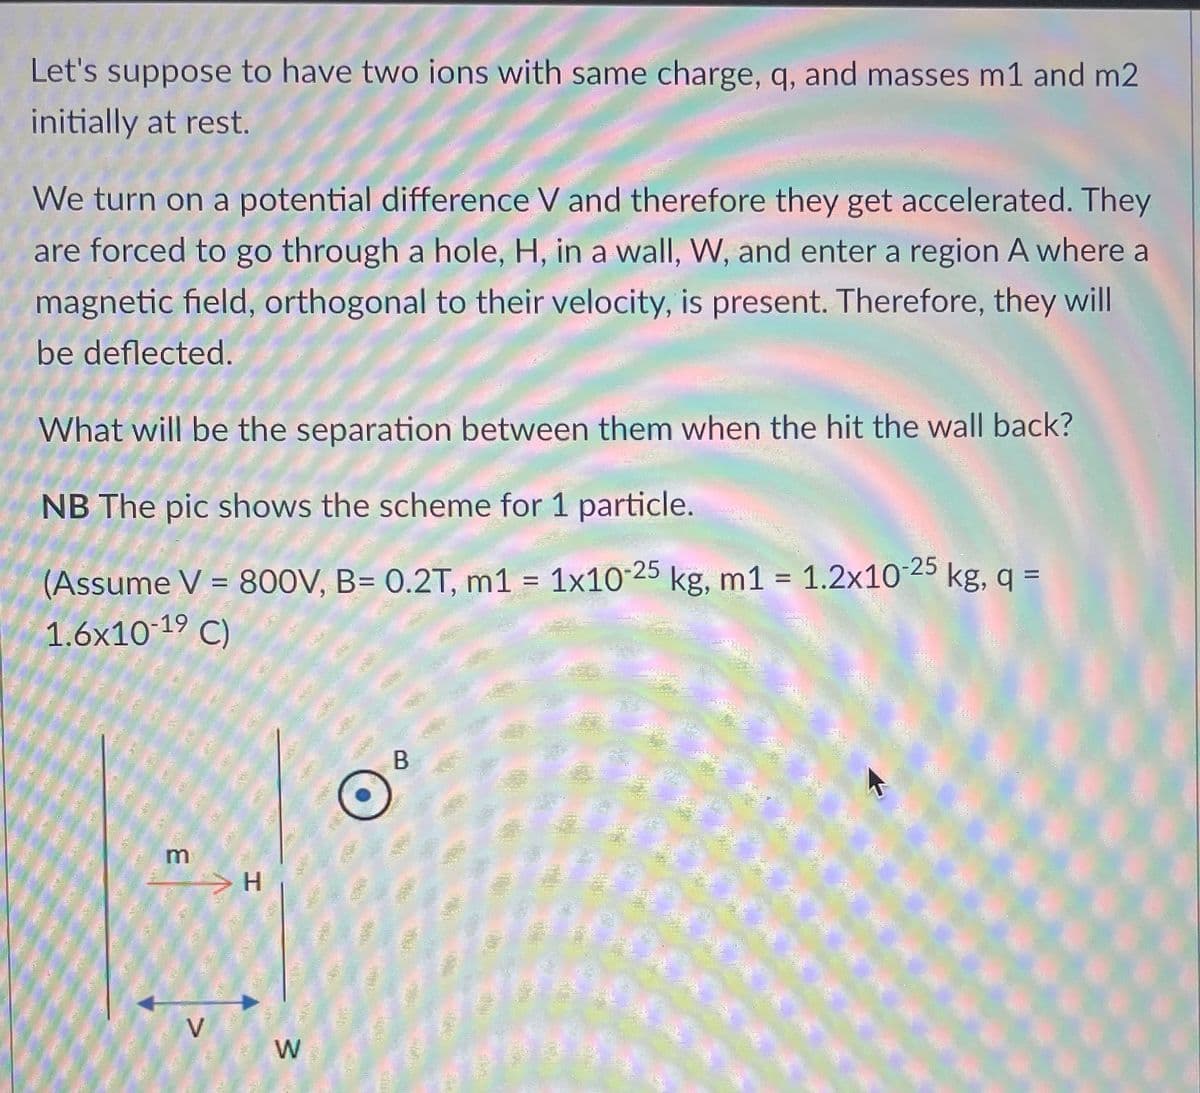 Let's suppose to have two ions with same charge, q, and masses m1 and m2
initially at rest.
We turn on a potential difference V and therefore they get accelerated. They
are forced to go through a hole, H, in a wall, W, and enter a region A where a
magnetic field, orthogonal to their velocity, is present. Therefore, they will
be deflected.
What will be the separation between them when the hit the wall back?
NB The pic shows the scheme for 1 particle.
(Assume V = 800V, B= 0.2T, m1 = 1x10-25 kg, m1 = 1.2x10-25 kg, q =
1.6x10-19 C)
m
7
V
H
W
B
122